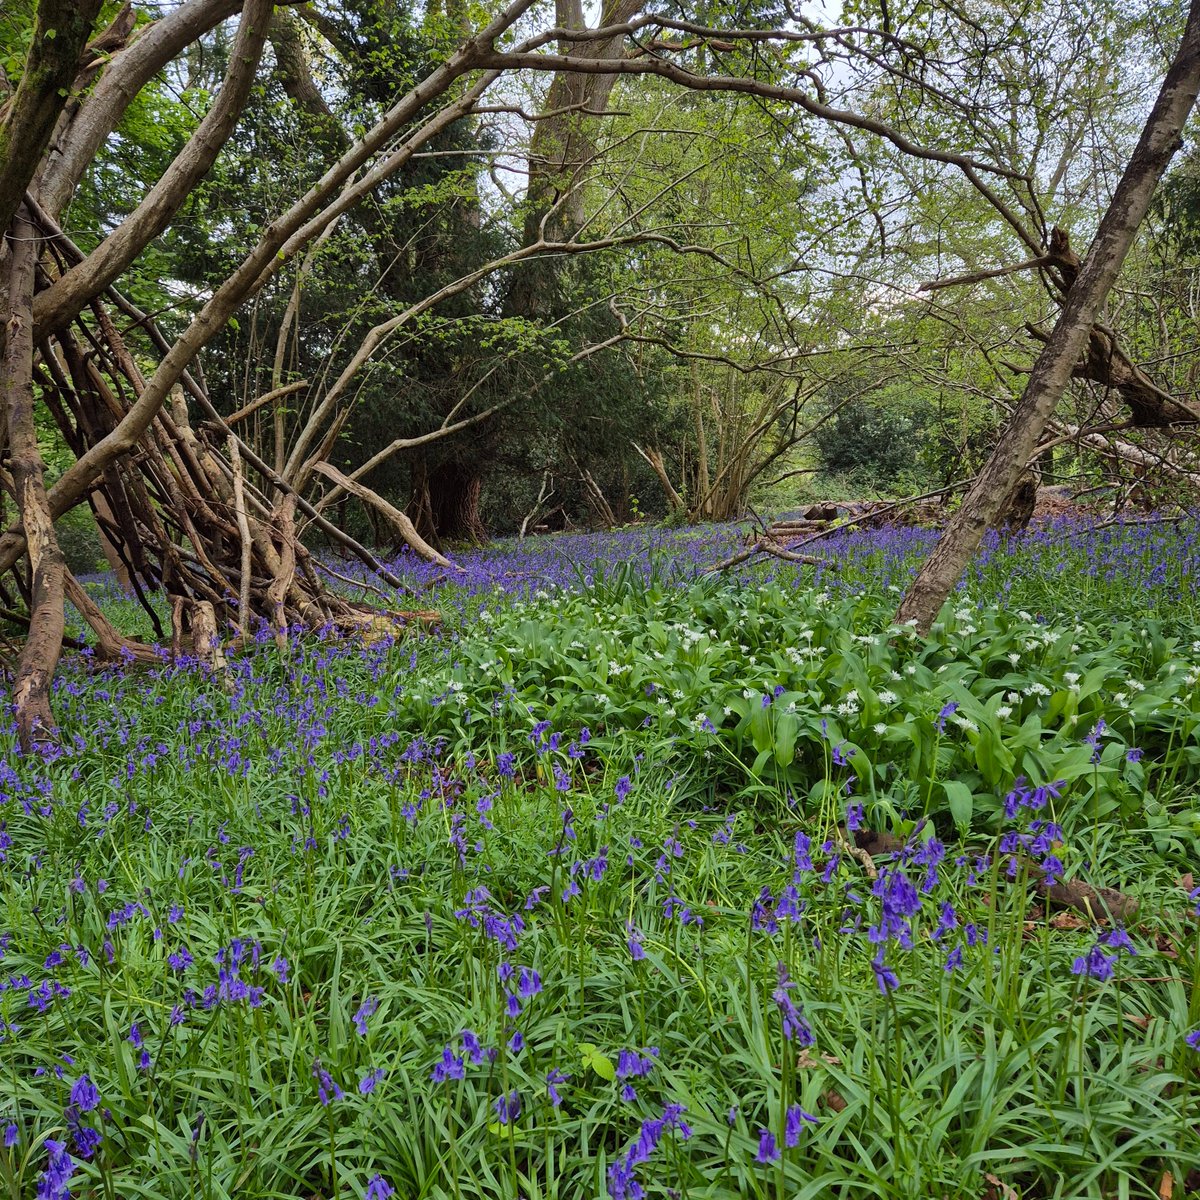 It’s bluebell season! Our favourites this year are at Abraham Wood, Boar’s Hill. They grow here in abundance thanks to the hard work of our volunteers, clearing the ground to let the sunlight in. Thanks also to @TOE_oxon for their support. #bluebells #greenspaces #oxford #OPT